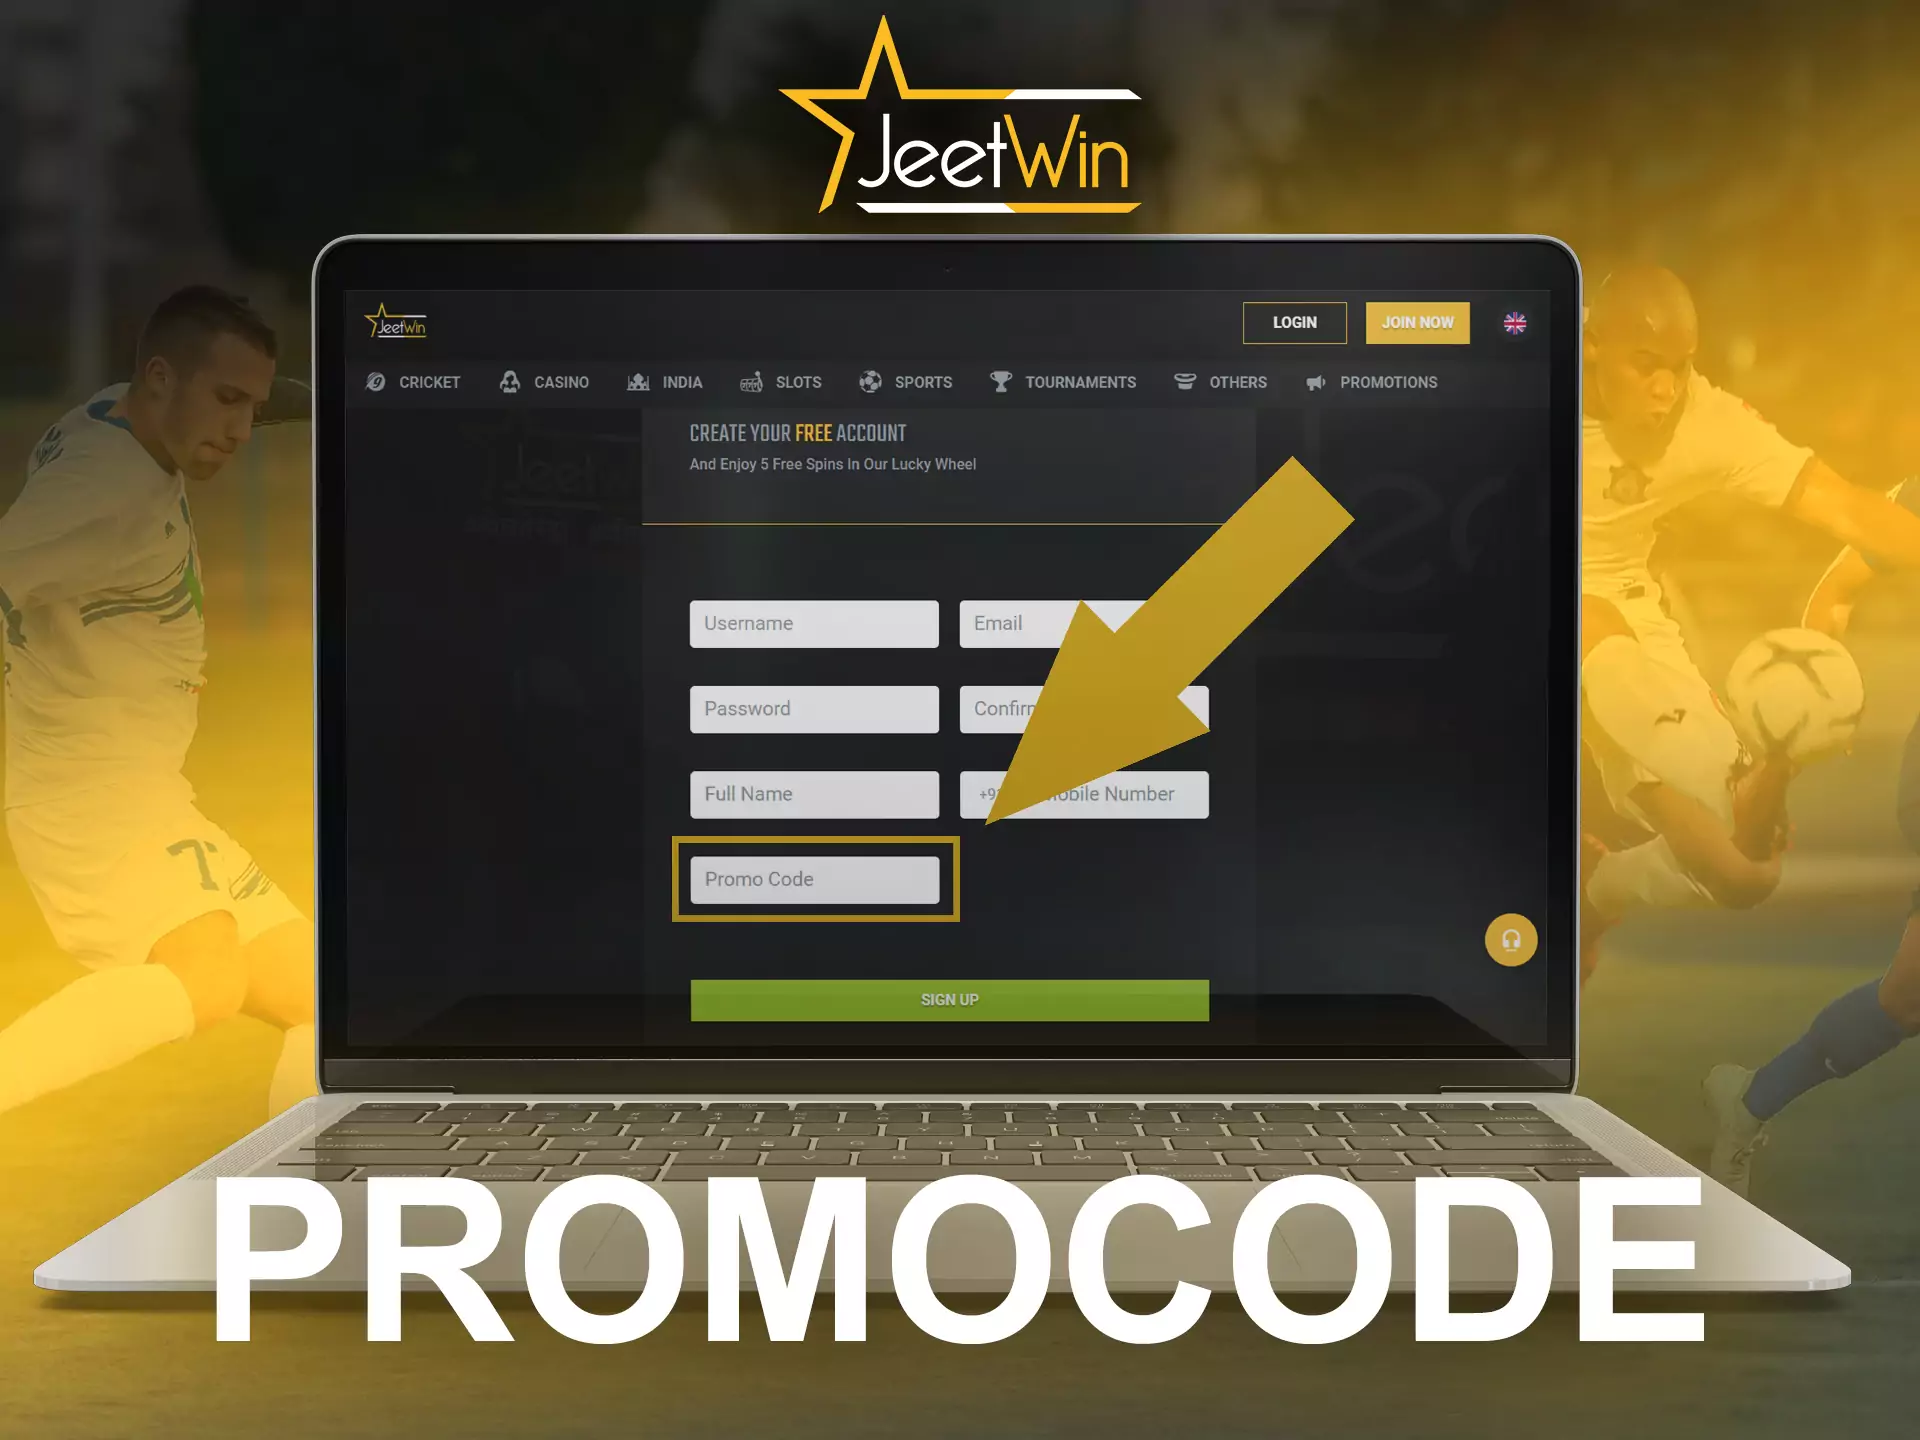 Use the special JeetWin promo code to get bonuses.